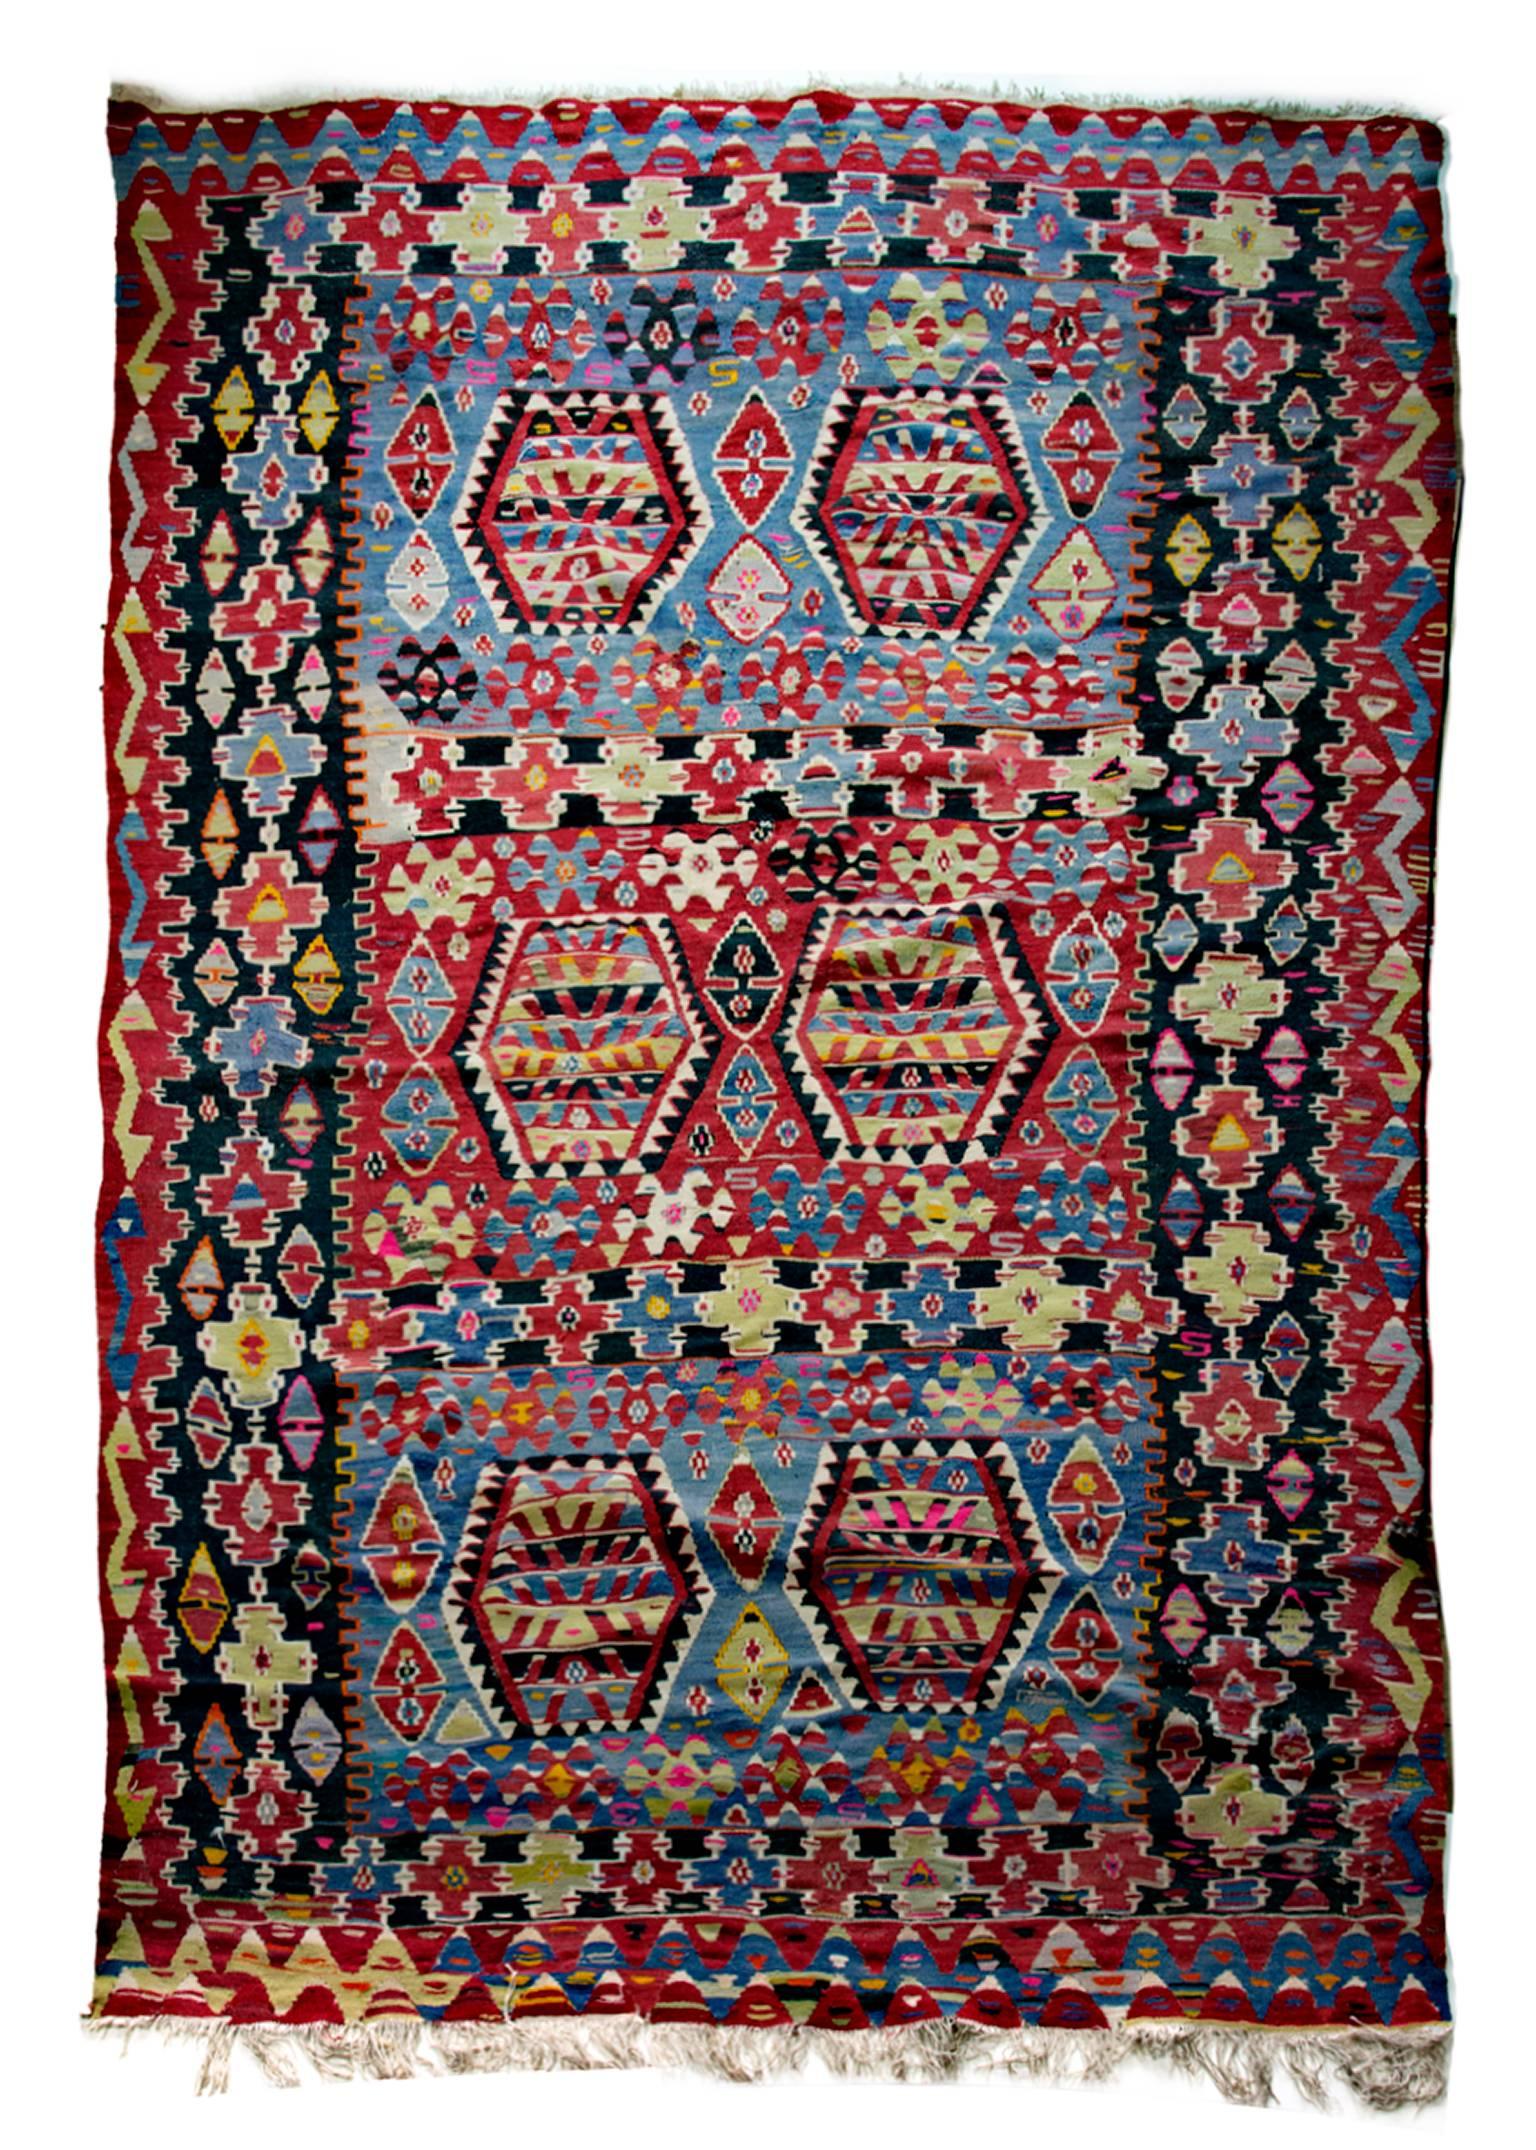 "Kilim Rug (Red & Black), " Hand Woven Mid 20th Century under $4500 design - Art by Unknown